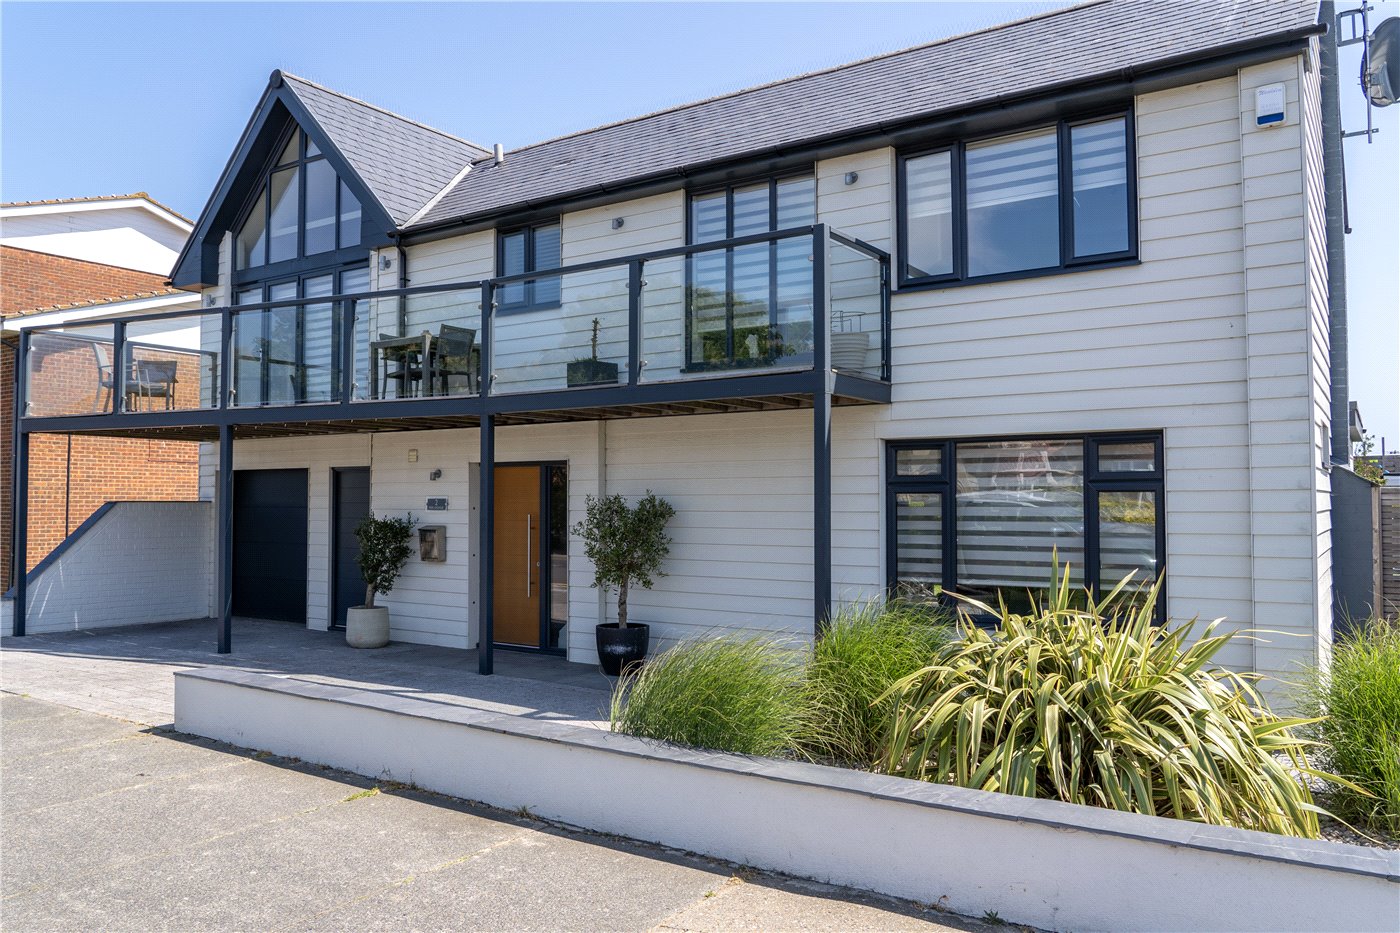 Pier Avenue, Whitstable, Kent, CT5